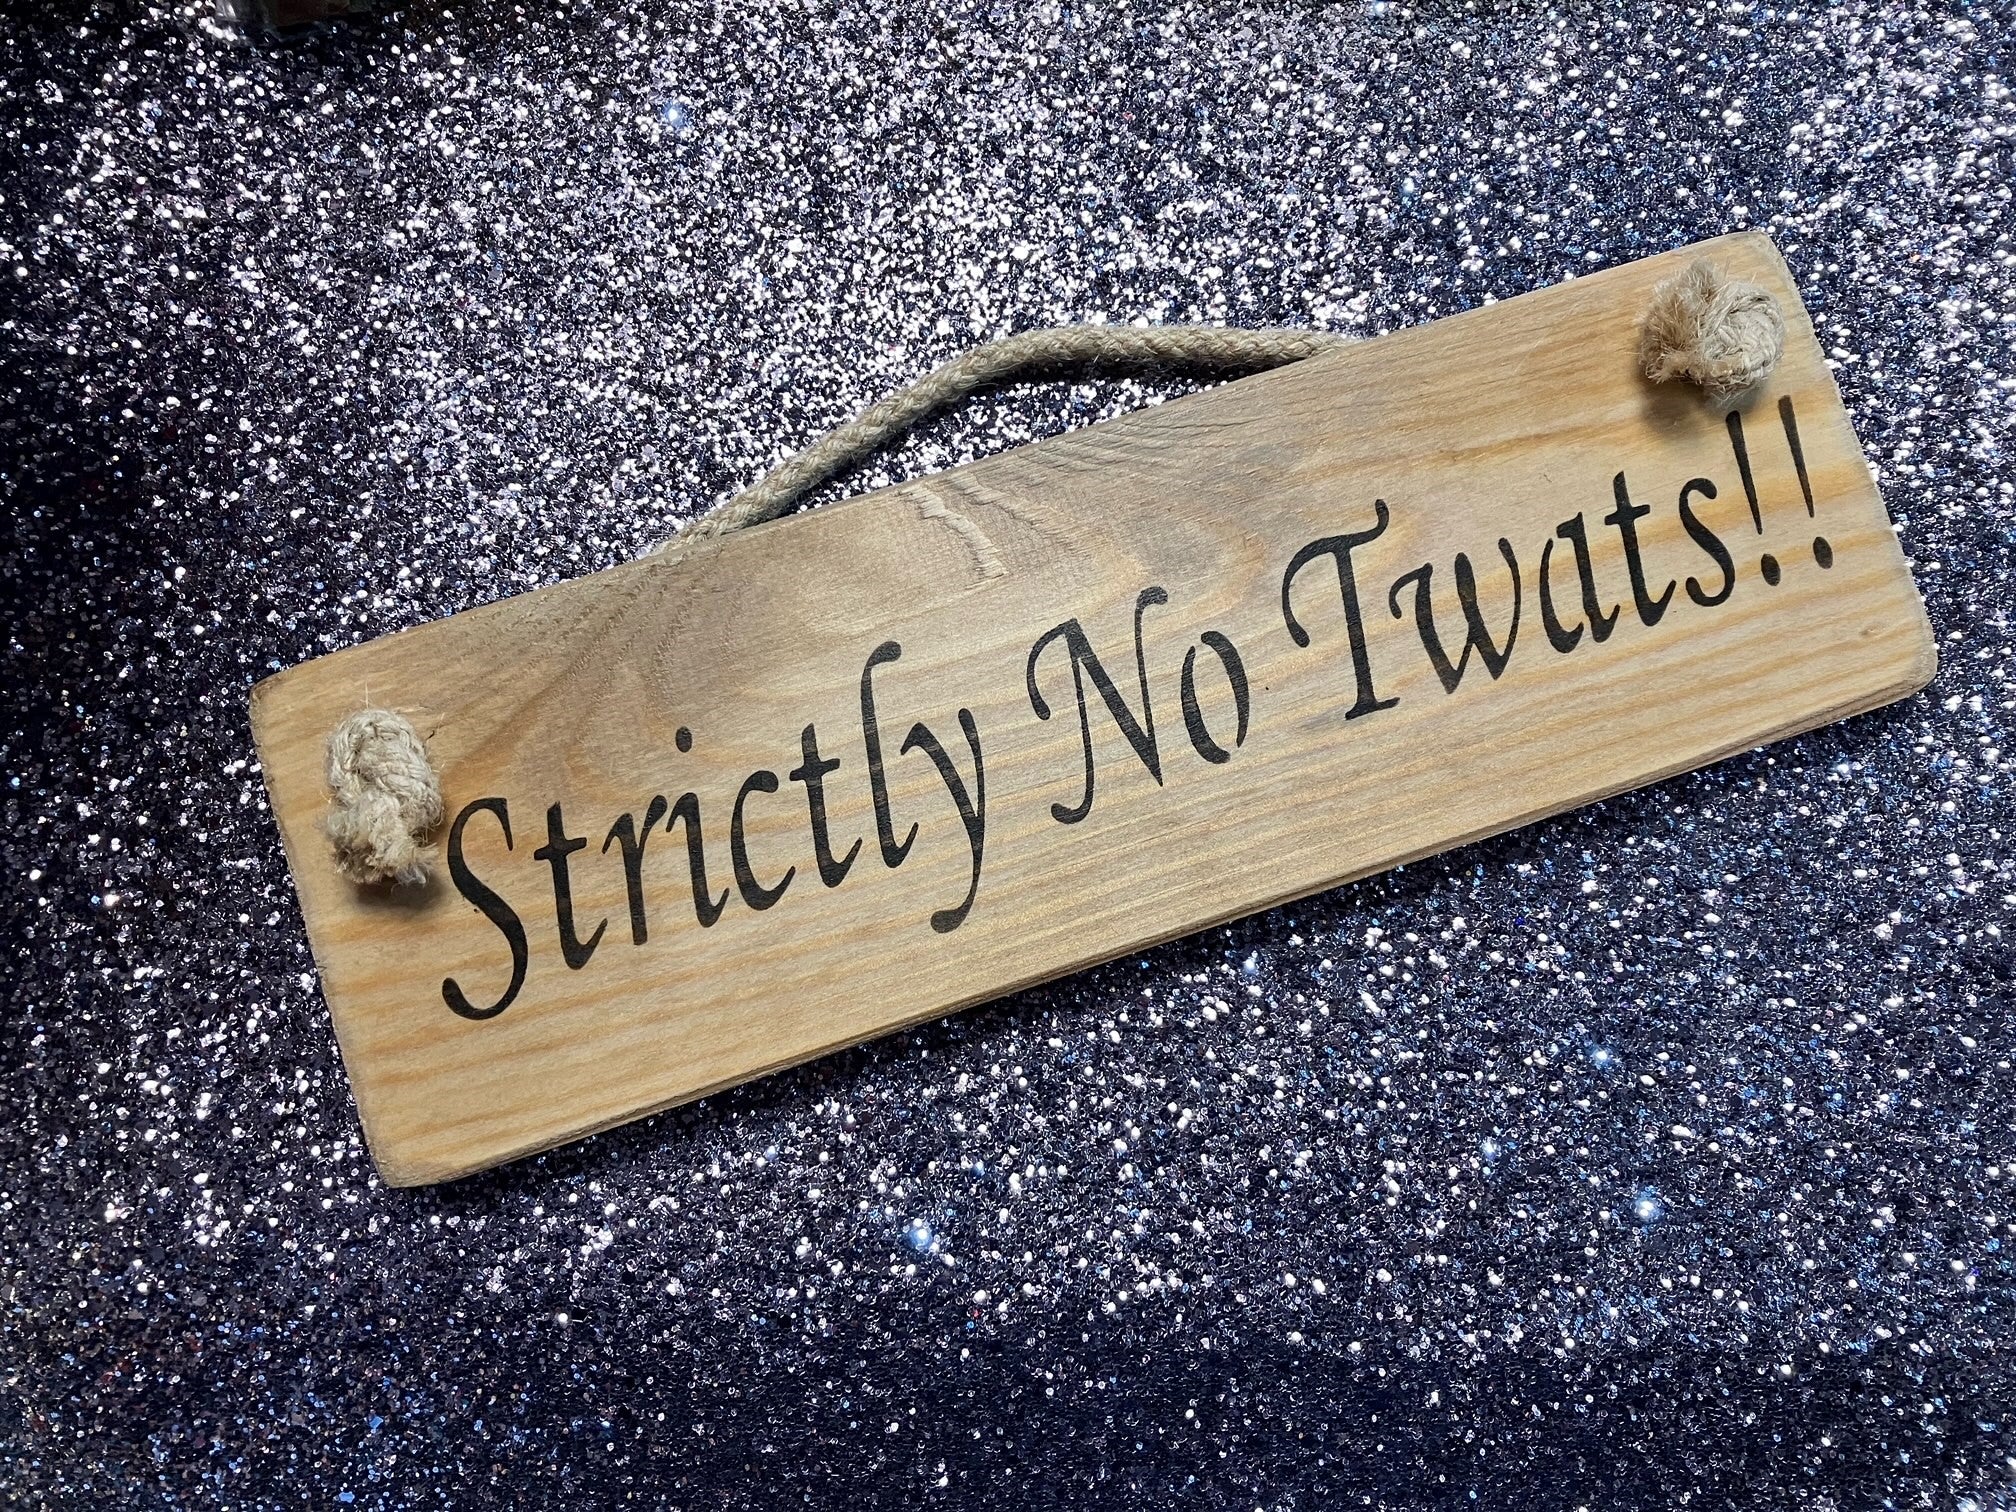 Strictly No Twats!! wooden roped sign